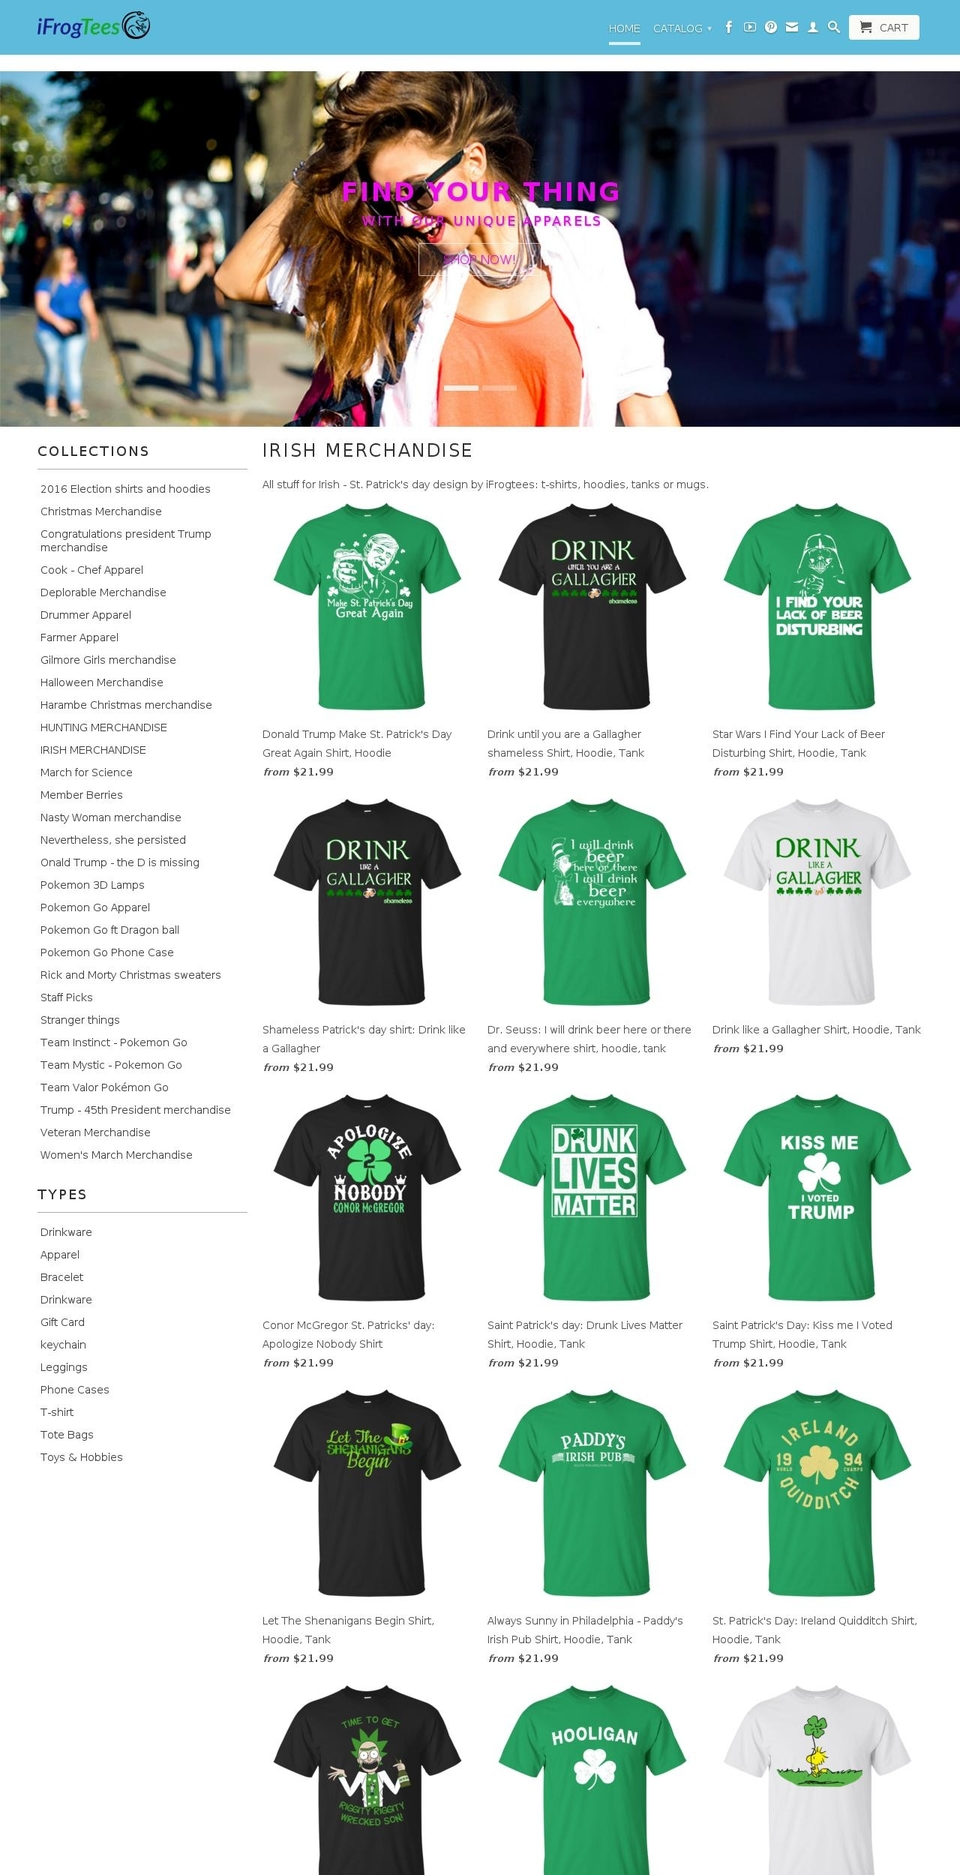 Minimog Shopify theme site example ifrogtees.com